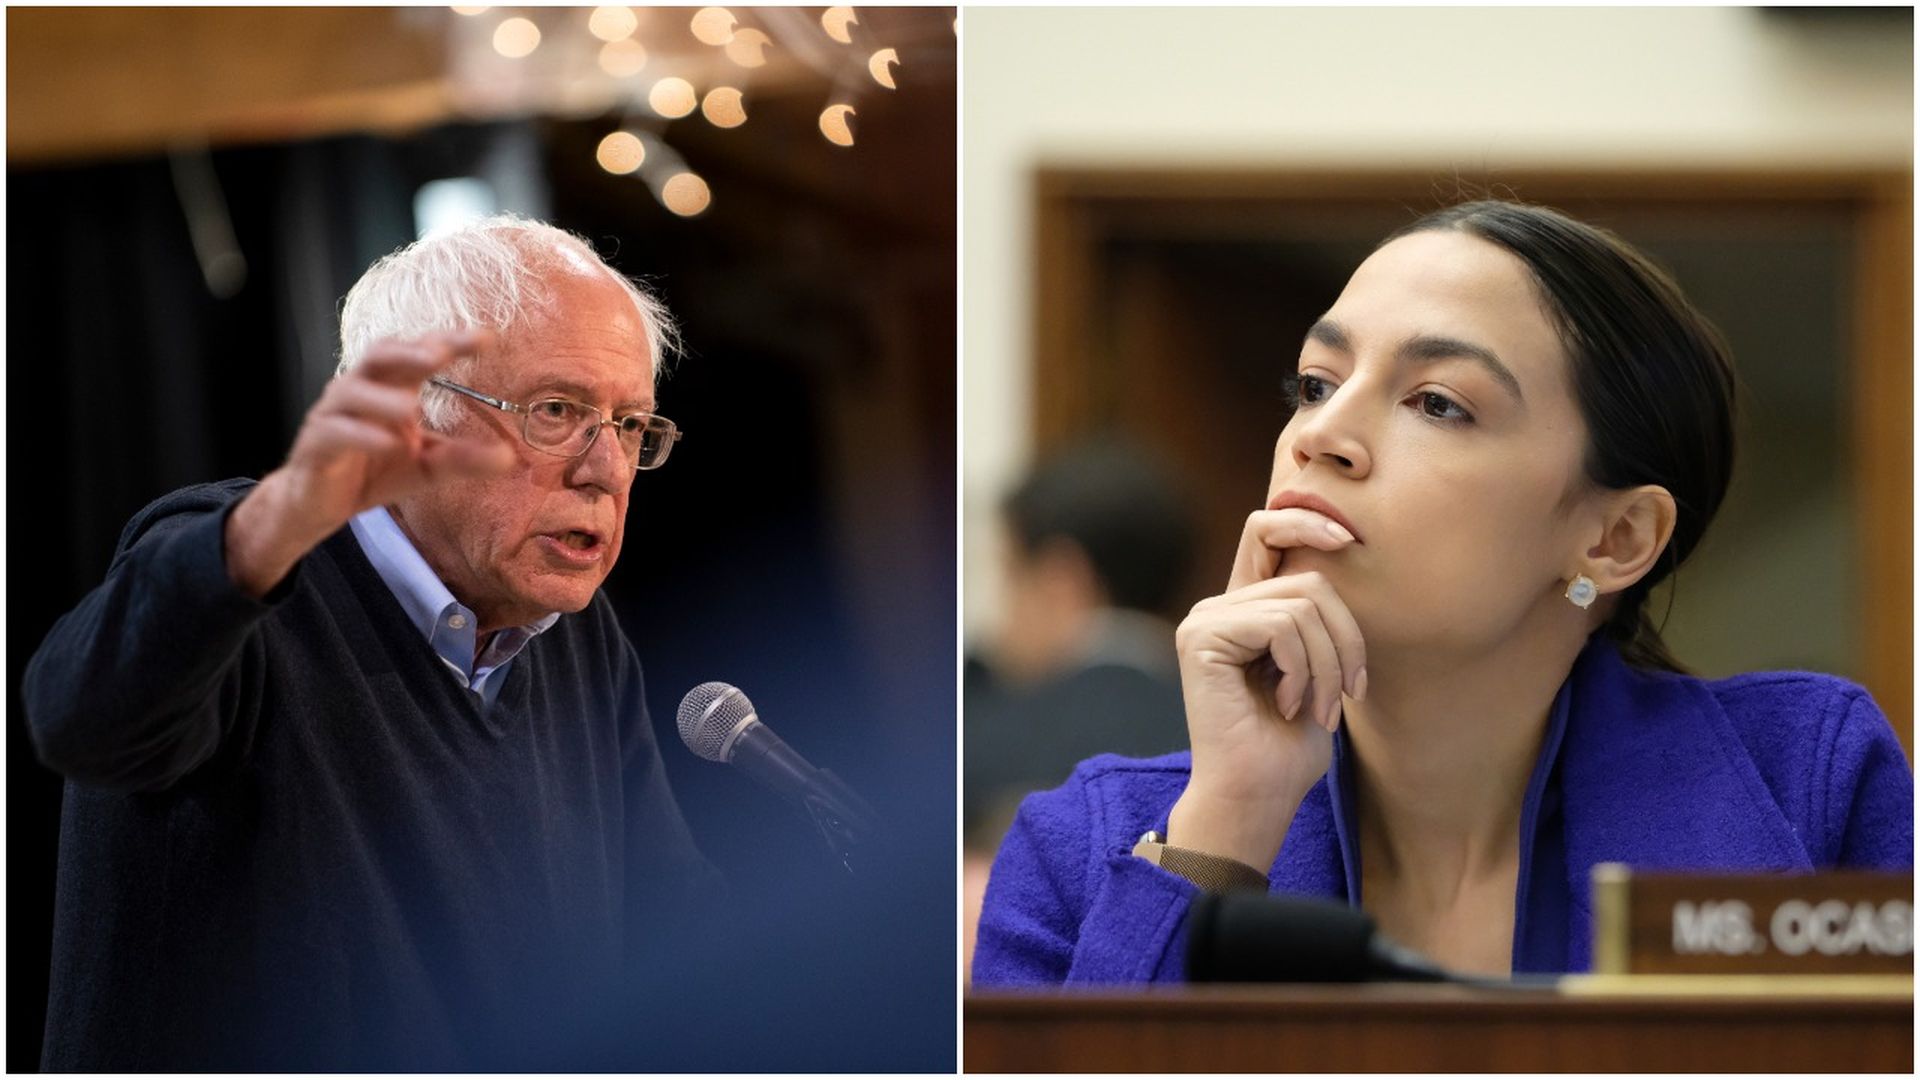 This image is a split-screen of Bernie Sanders and AOC.